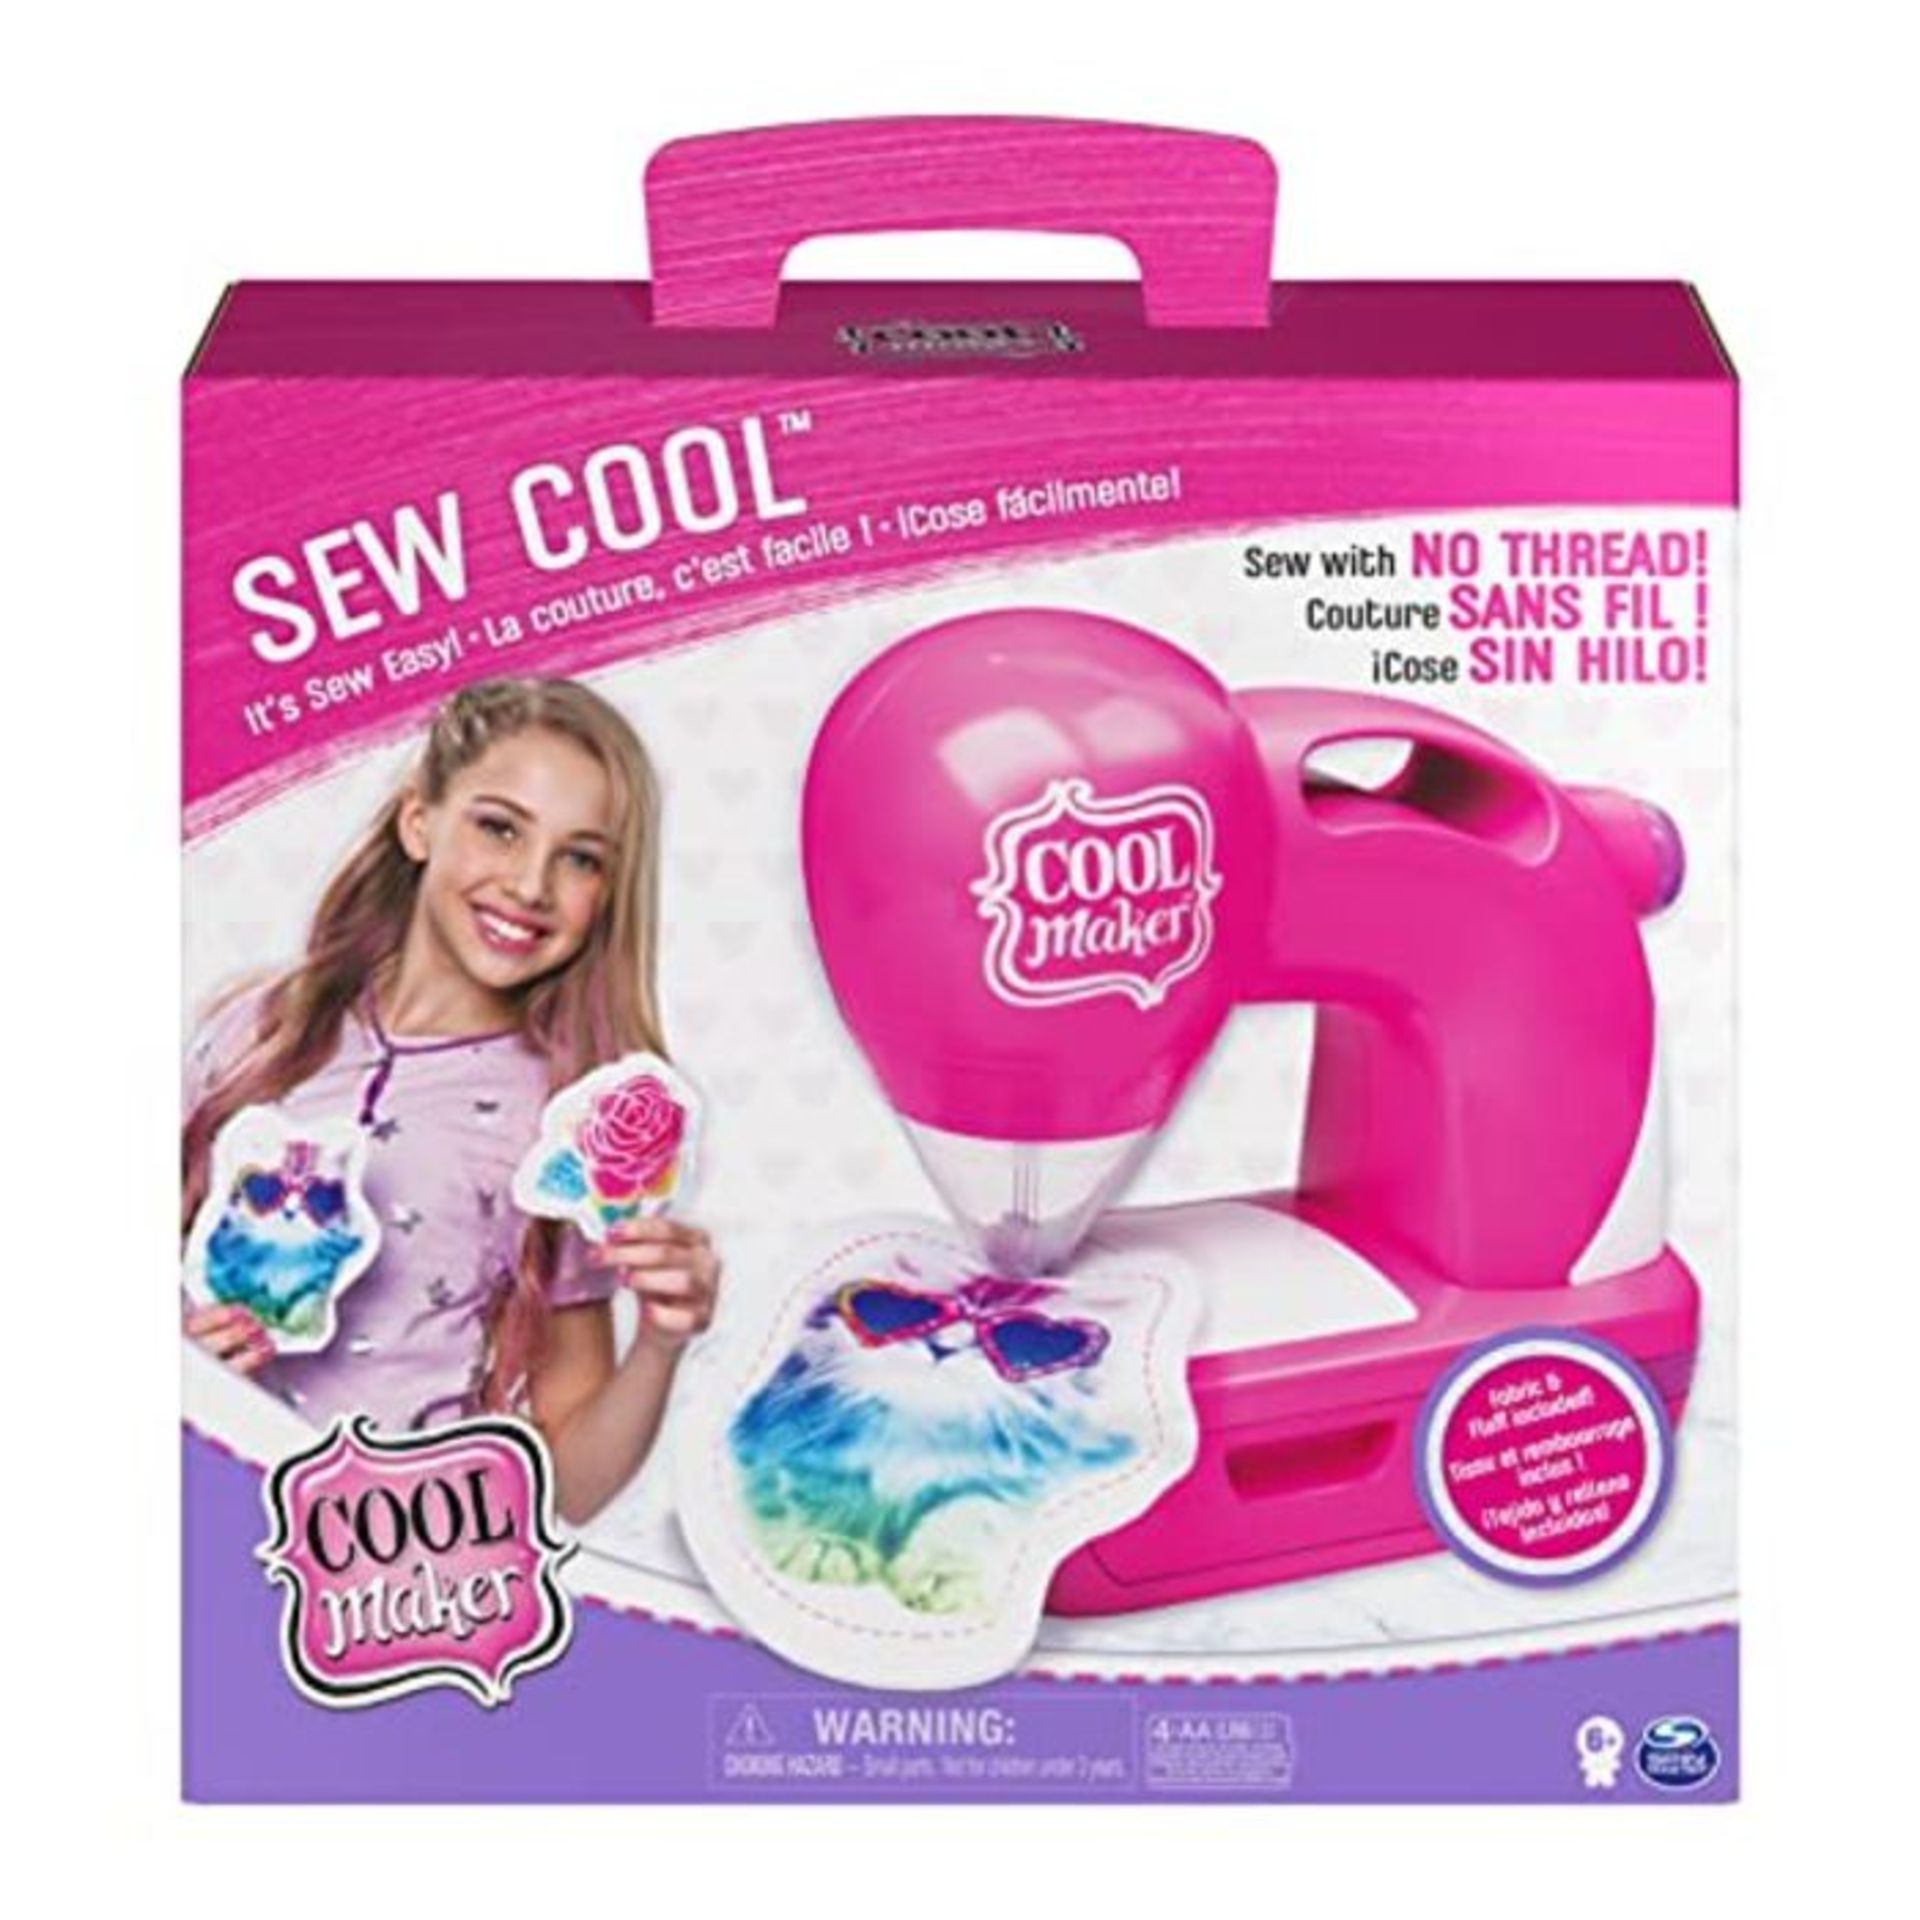 Cool Maker Sew Cool Sewing Machine with 5 Trendy Projects and Fabric, for Kids 6 Aged